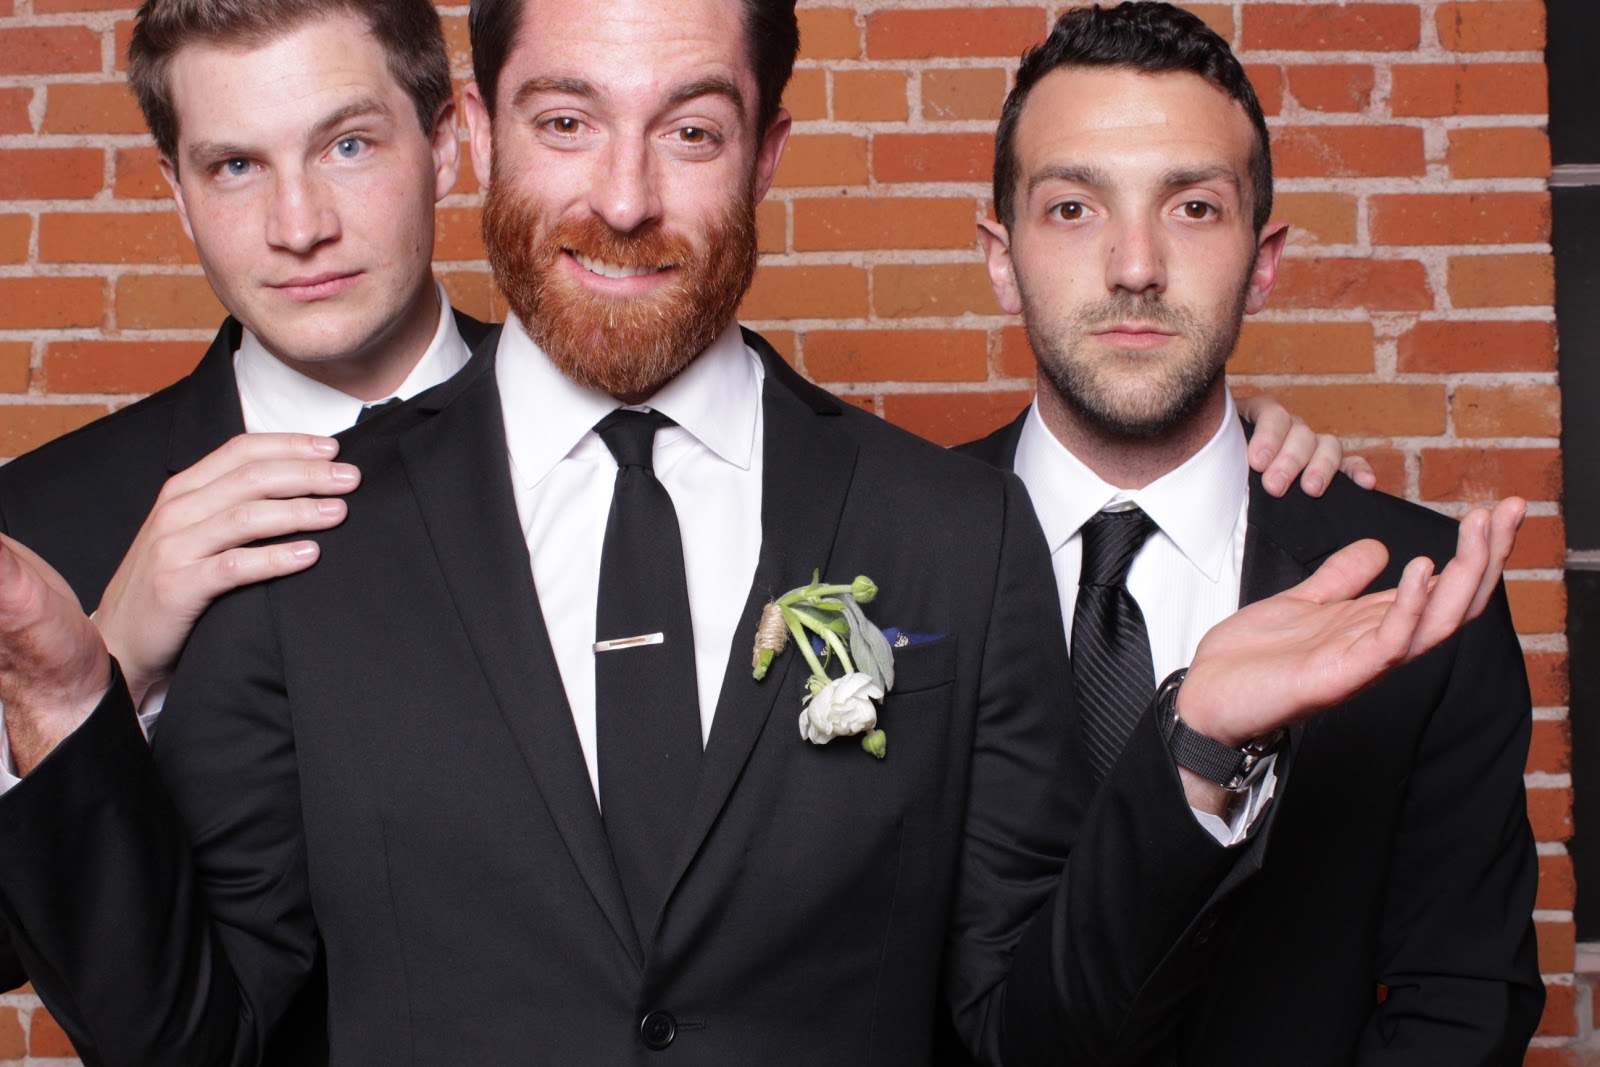 8 Questions to Ask When Choosing a Photo Booth Company for Your Wedding